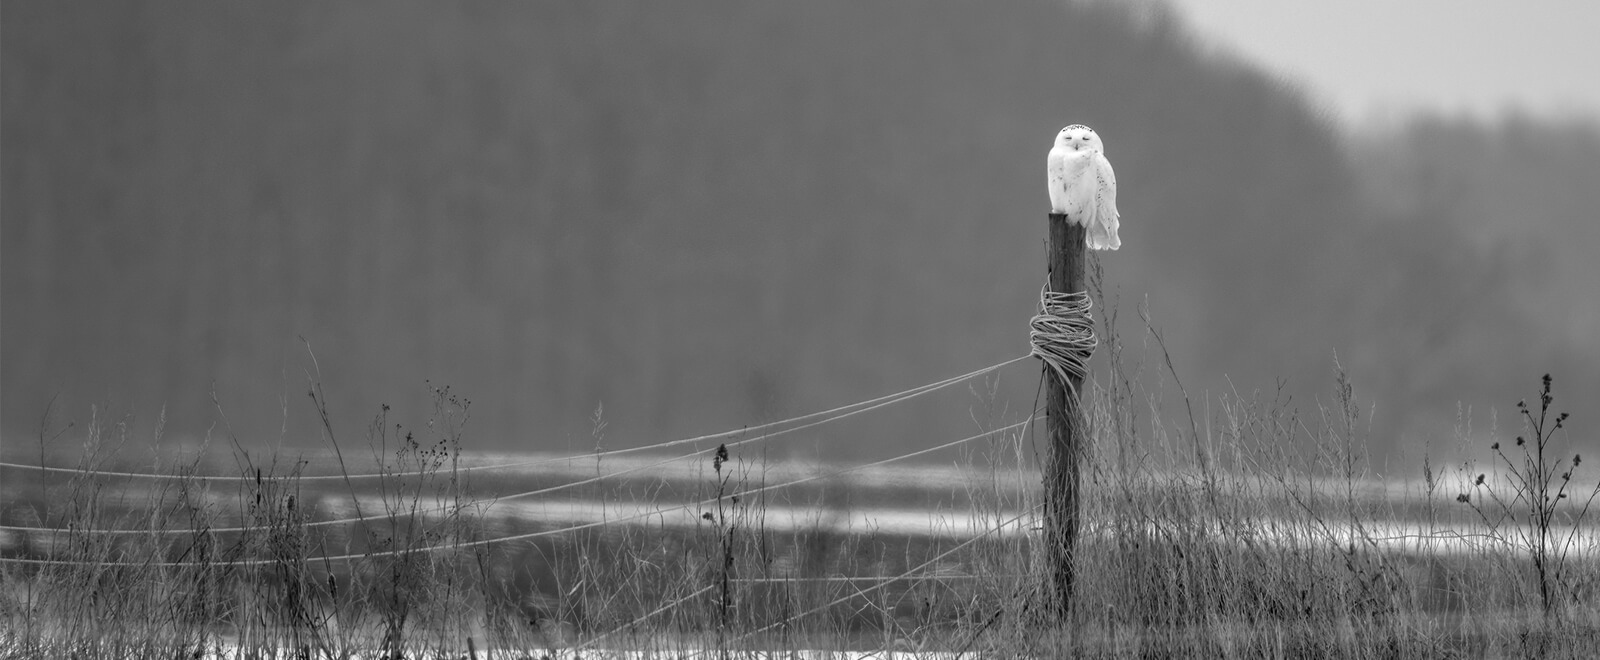 Snowy owl on a fence, blurry gray background